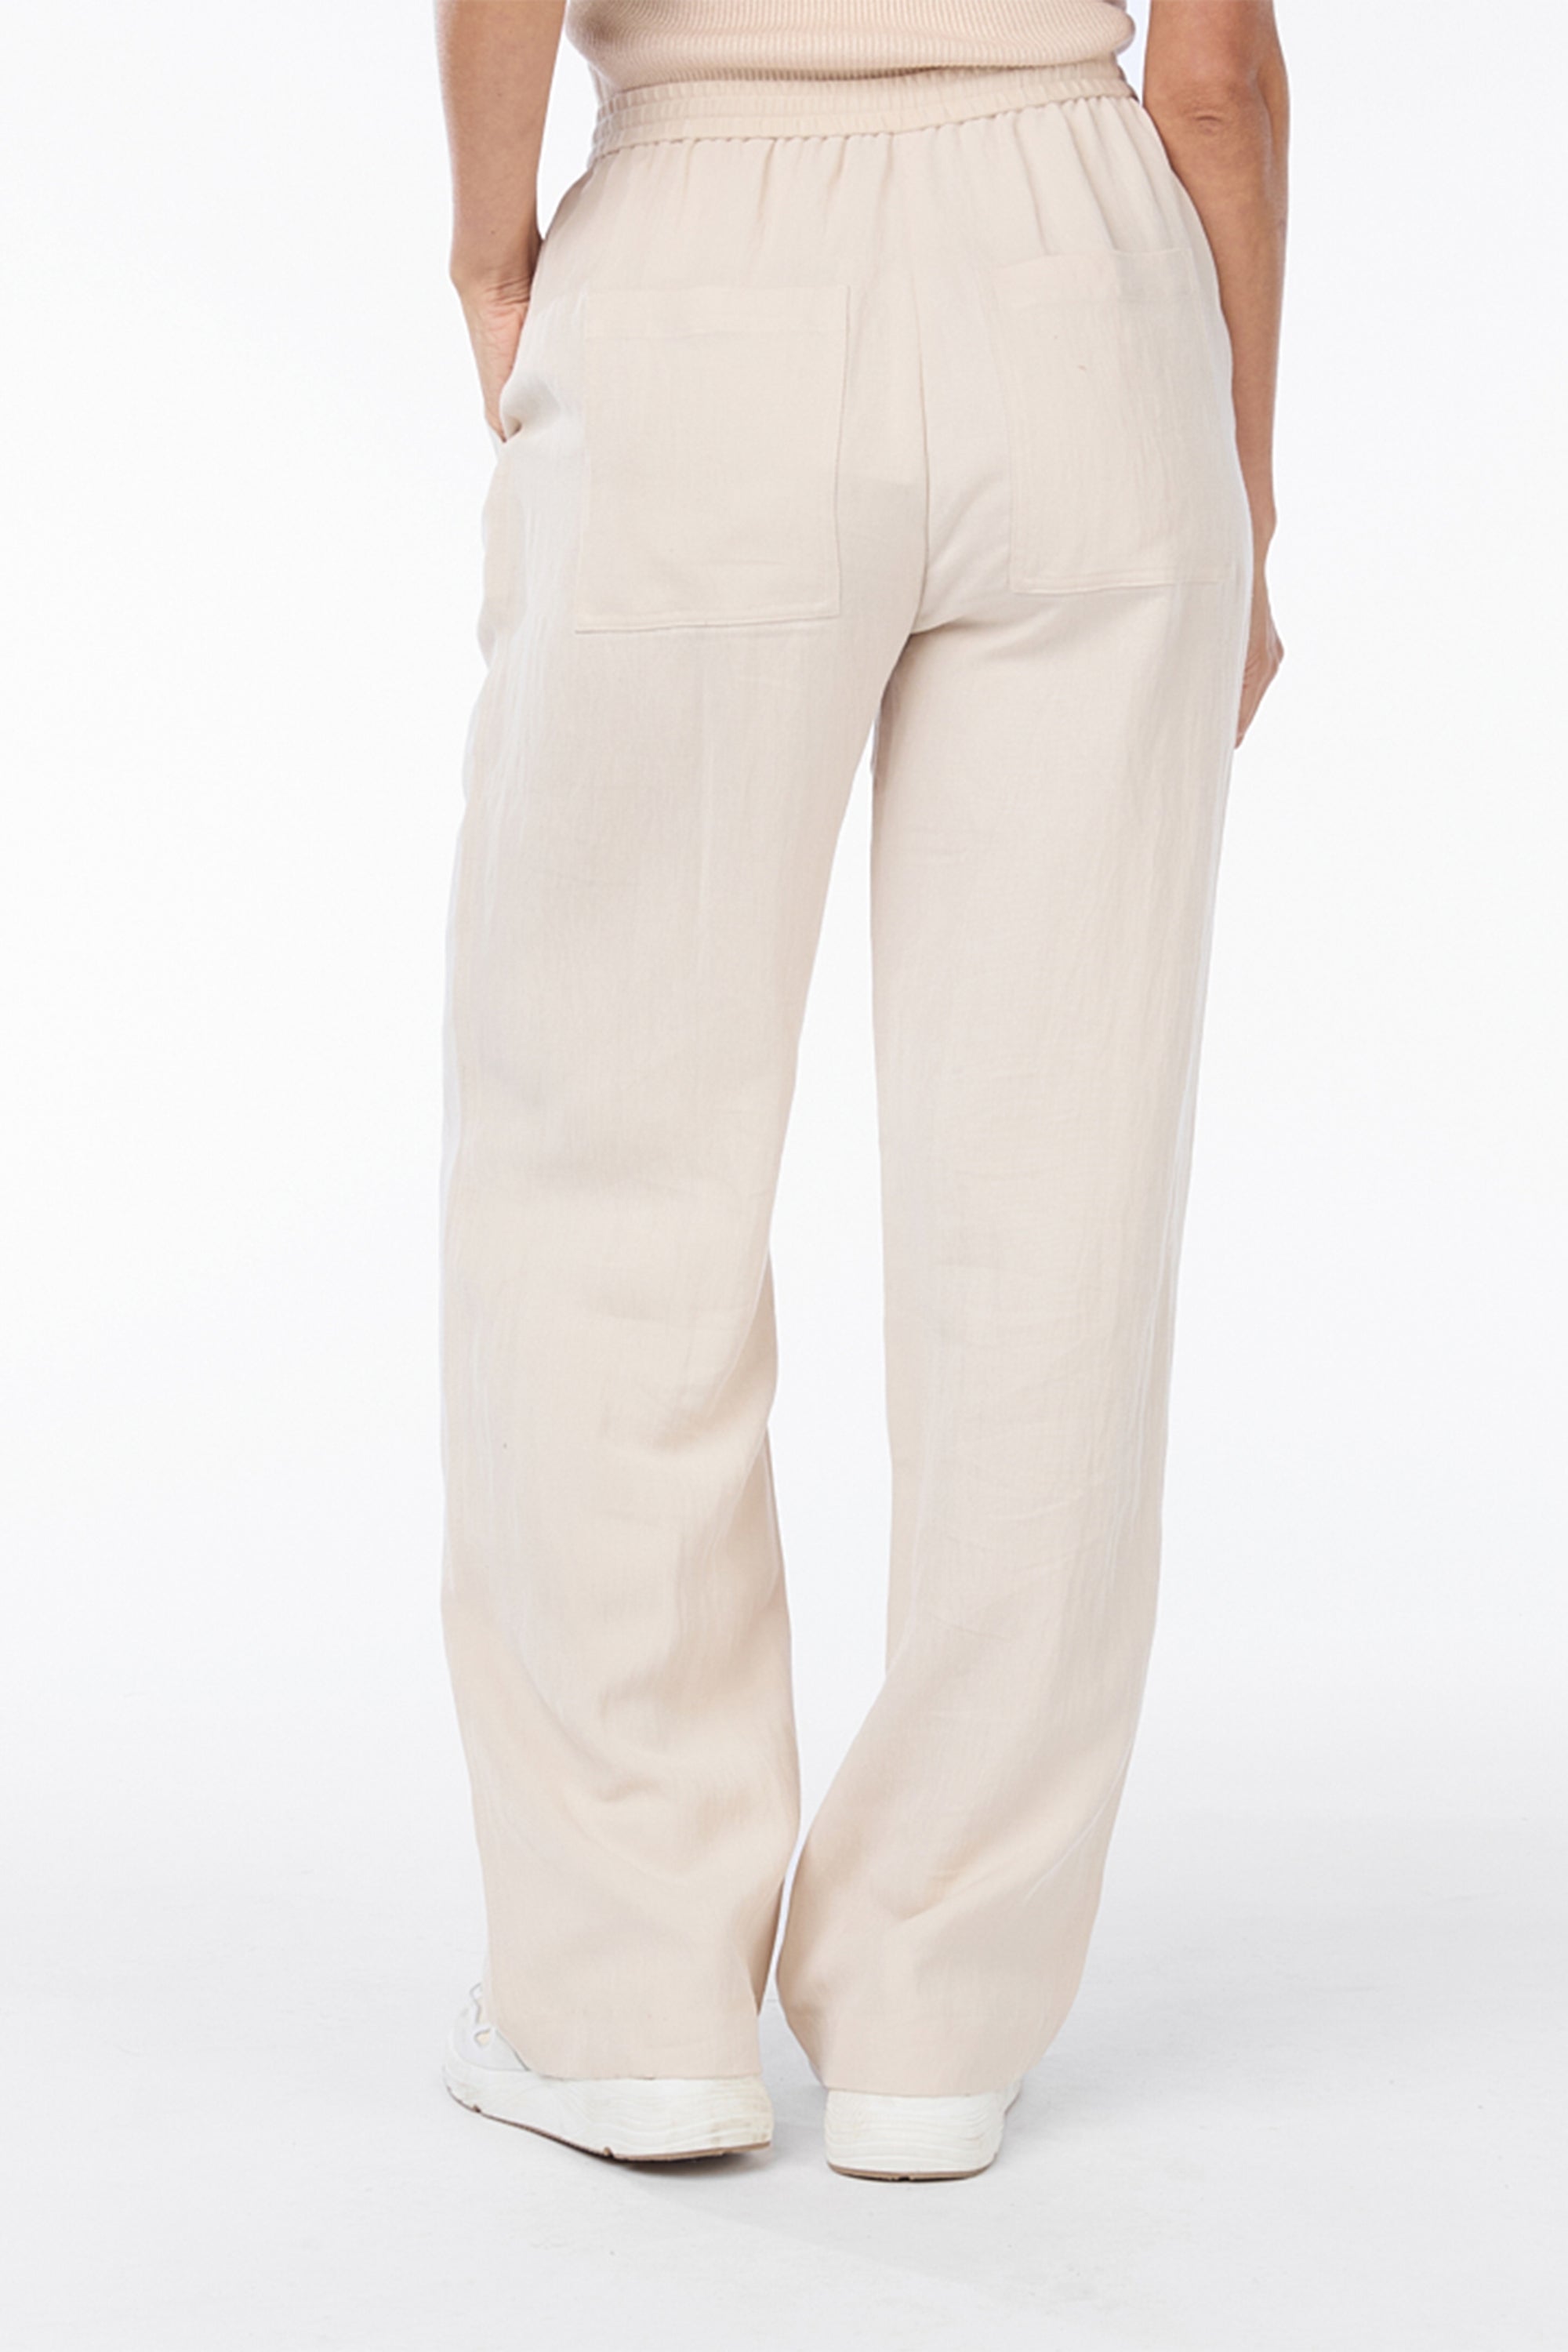 Back view of Esqualo (SP2410017) Women's Pull On High Rise Wide Leg Trousers with Pockets in Sand